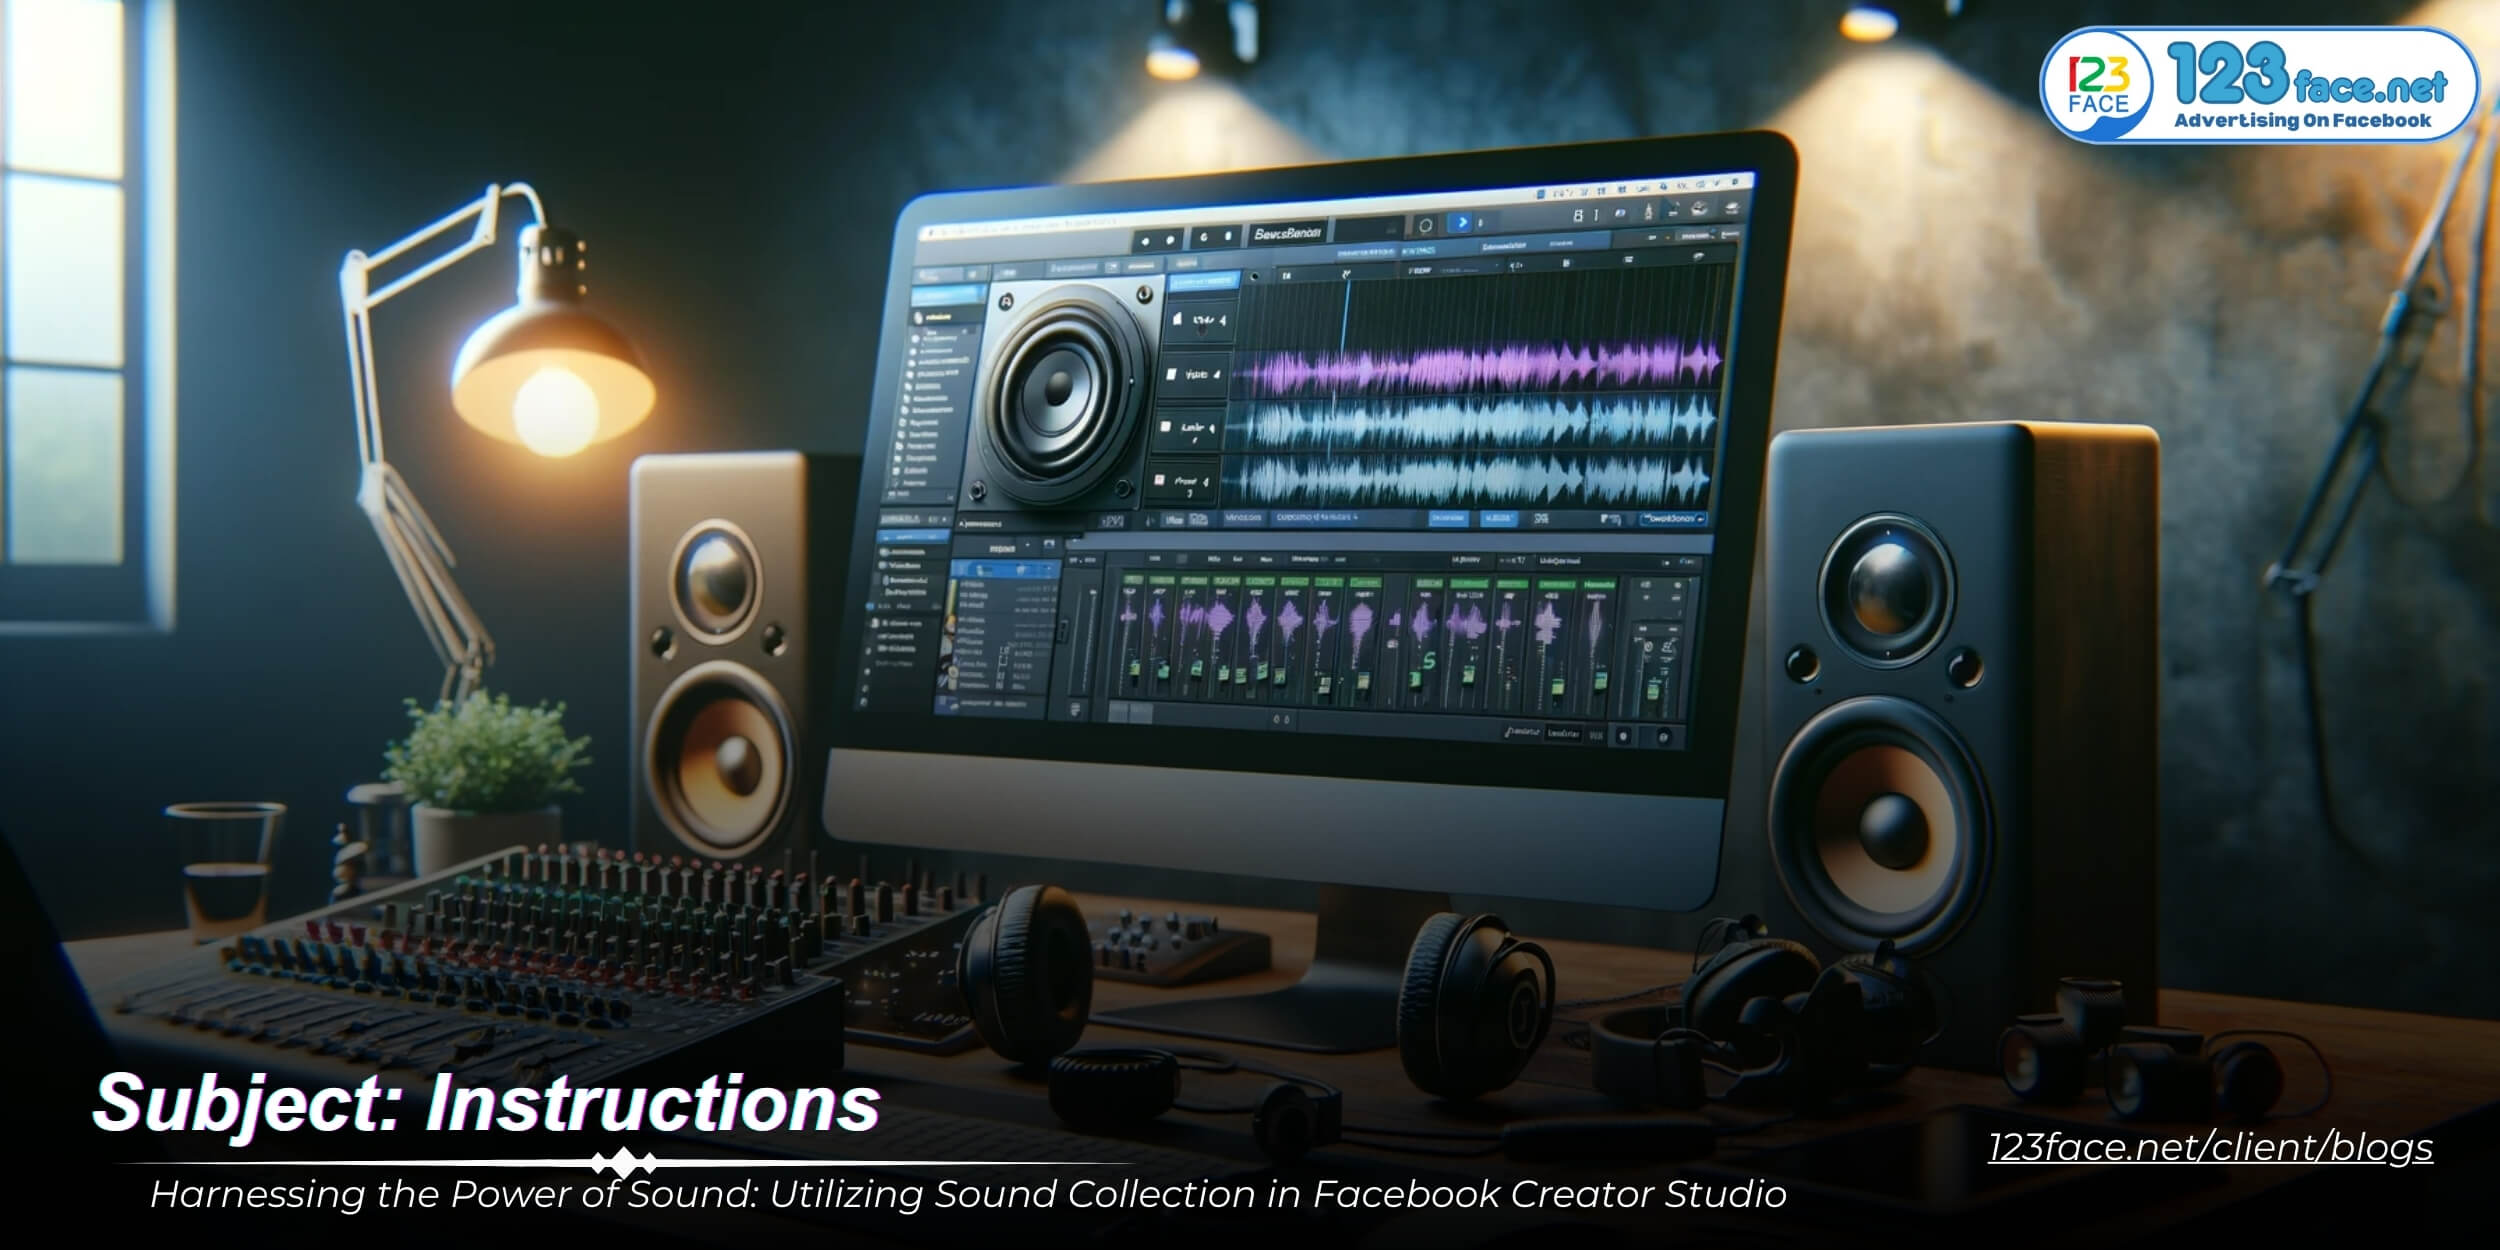 Harnessing the Power of Sound: Utilizing Sound Collection in Facebook Creator Studio